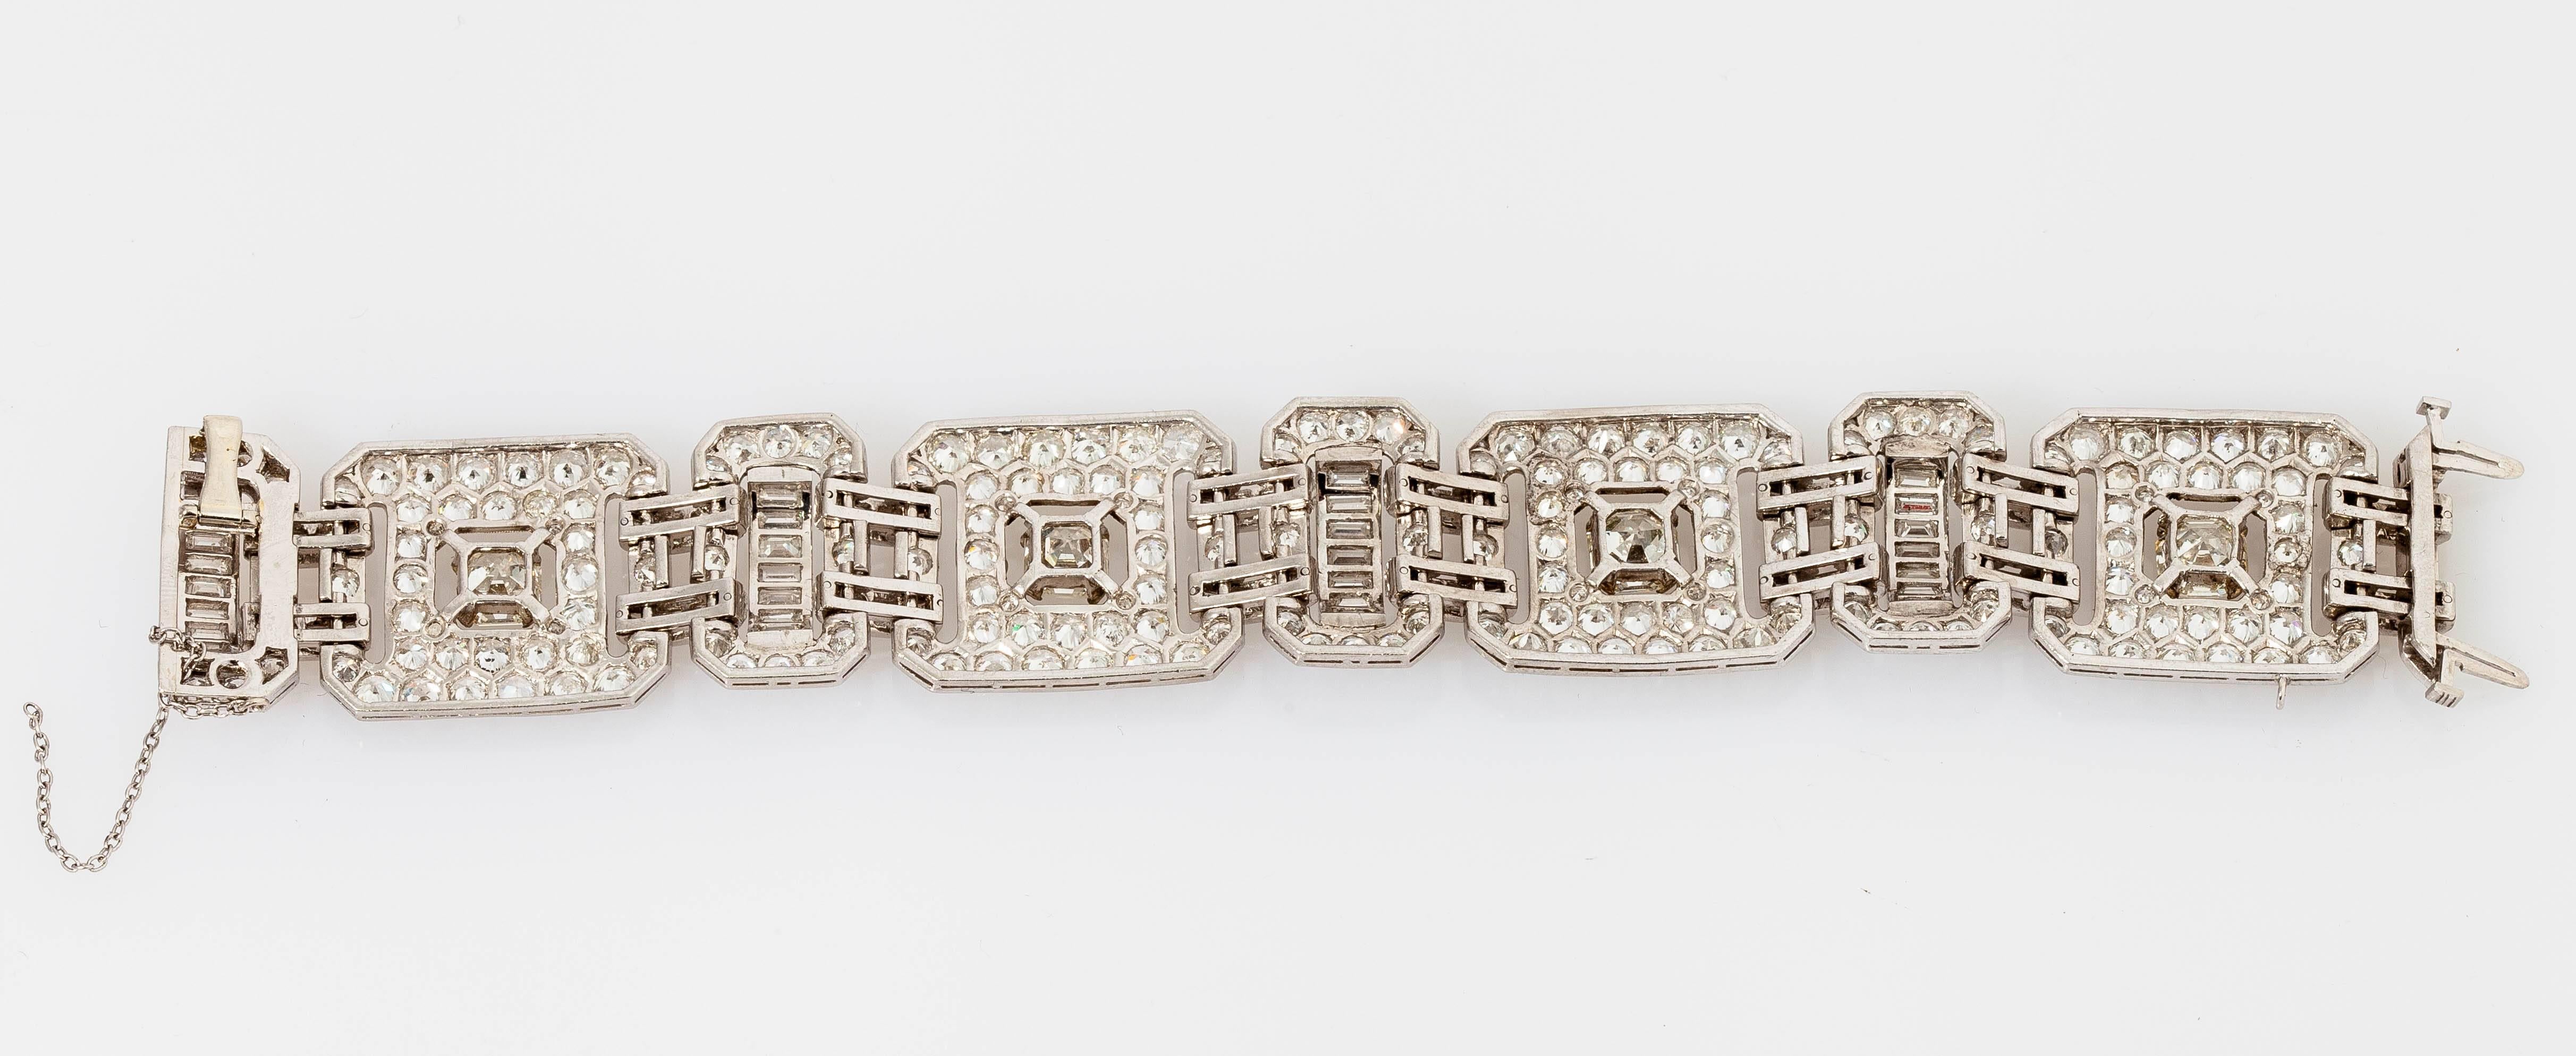 Beautiful Art Deco Diamond Bracelet finely crafted in platinum with round brilliant cut diamonds weighing approx. 35.00 carats and 4 stones of diamonds which are certified by GIA weighing 1 DIA 1.85 KVS1; 1 DIA 1.71 J VS1; 1 DIA 1.63 J VS2; 1 DIA